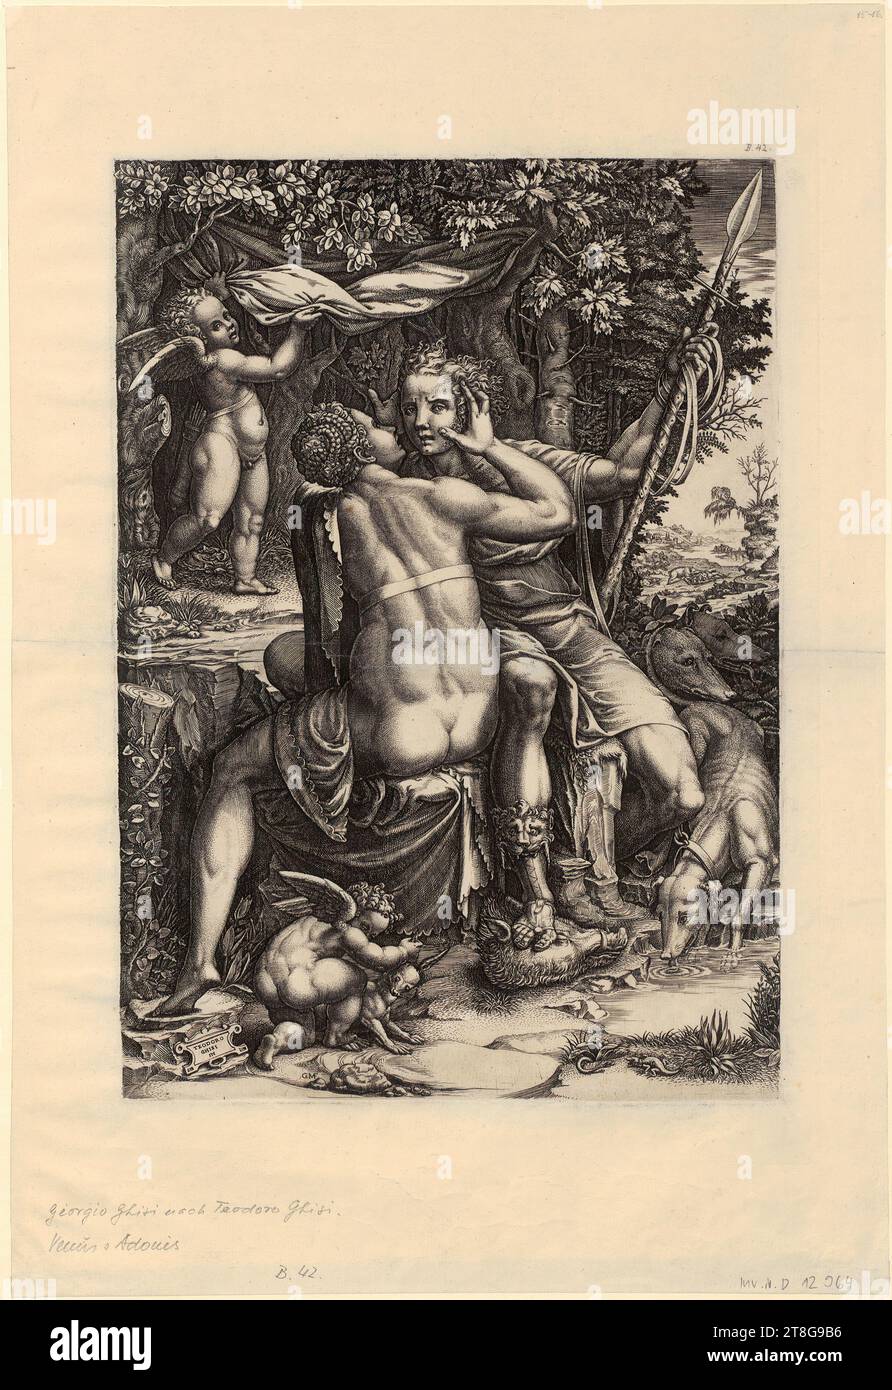 Hendrick Goltzius (1558 - 1617), artist, Pietà, Anonymous (dating unknown), engraver Hendrick Goltzius (1558 - 1617), copy after Pietà, Giorgio Ghisi (1520 - 1582), artist Teodoro Ghisi (1536 - 1601), after, Venus and Adonis, origin of the print medium: circa 1570, engraving, sheet size: 45. 3 x 30.0 cm (lower sheet margin folded)Plate margin: 32.4 x 22.7 cm, Bottom left on text plate inscribed 'TEODORO, GHISI, IN' and to the right of it monogrammed 'G.MF Stock Photo